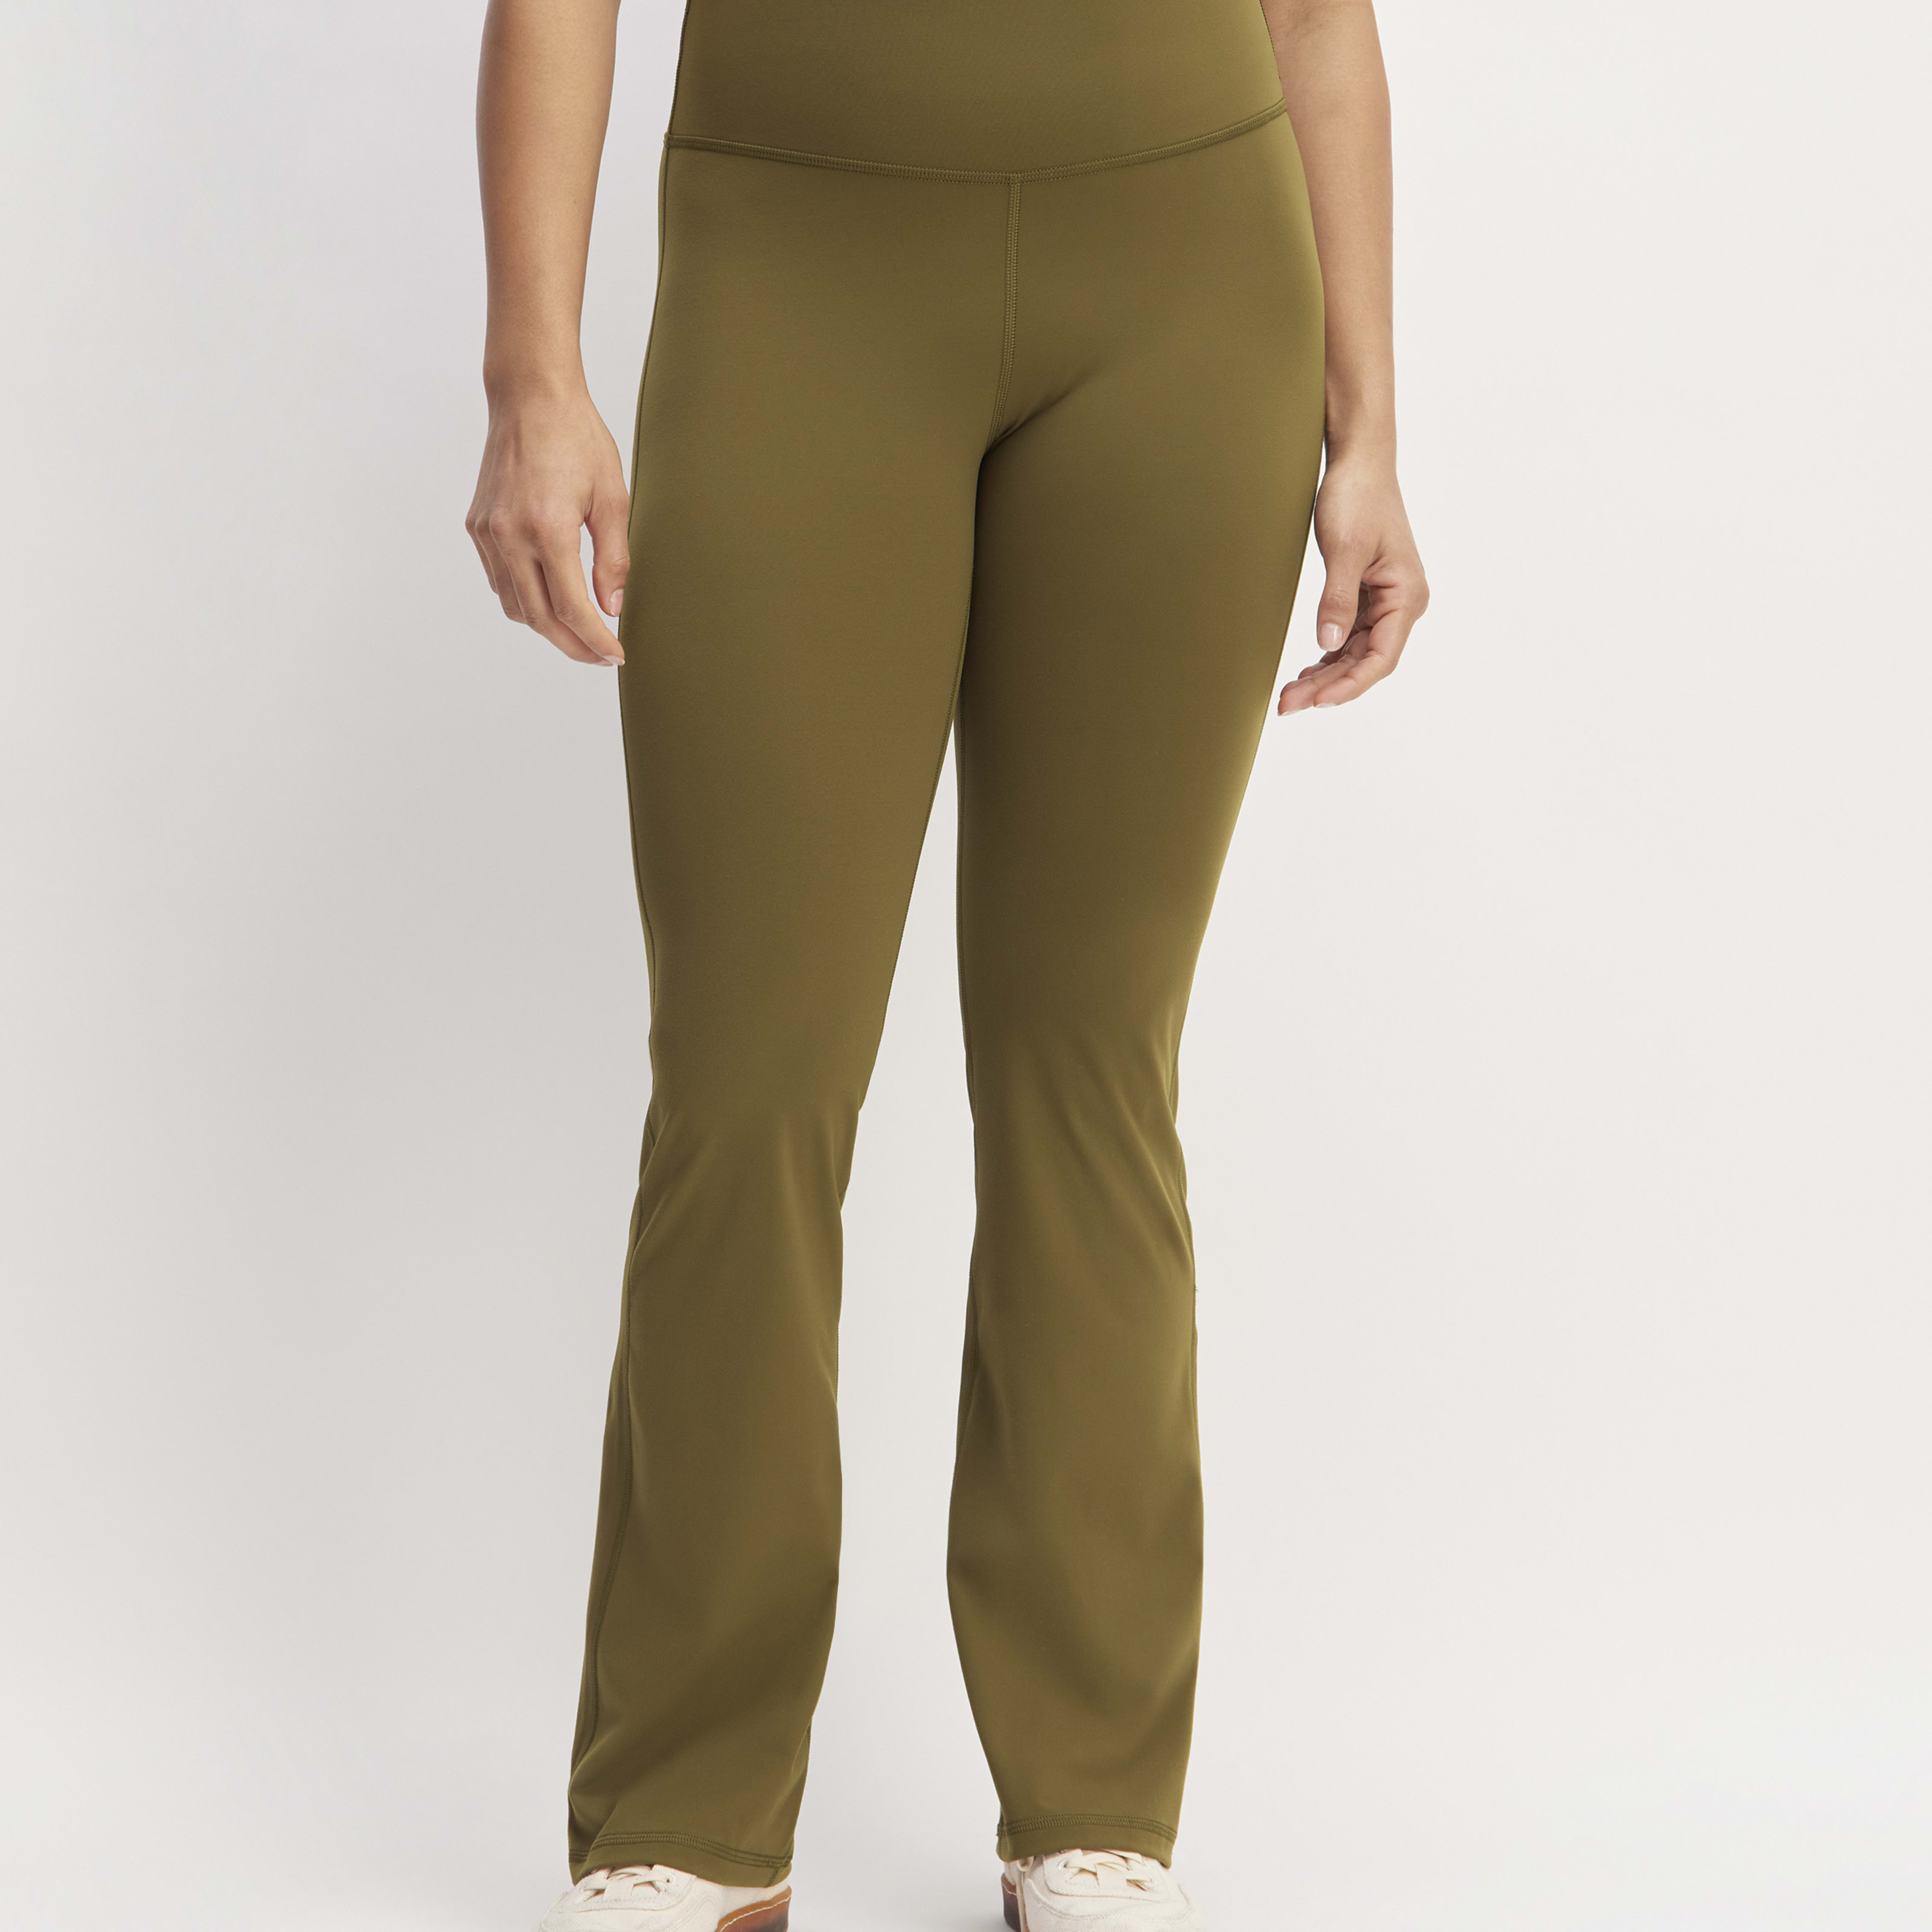 women's perform flare legging by everlane in olive, size xxs